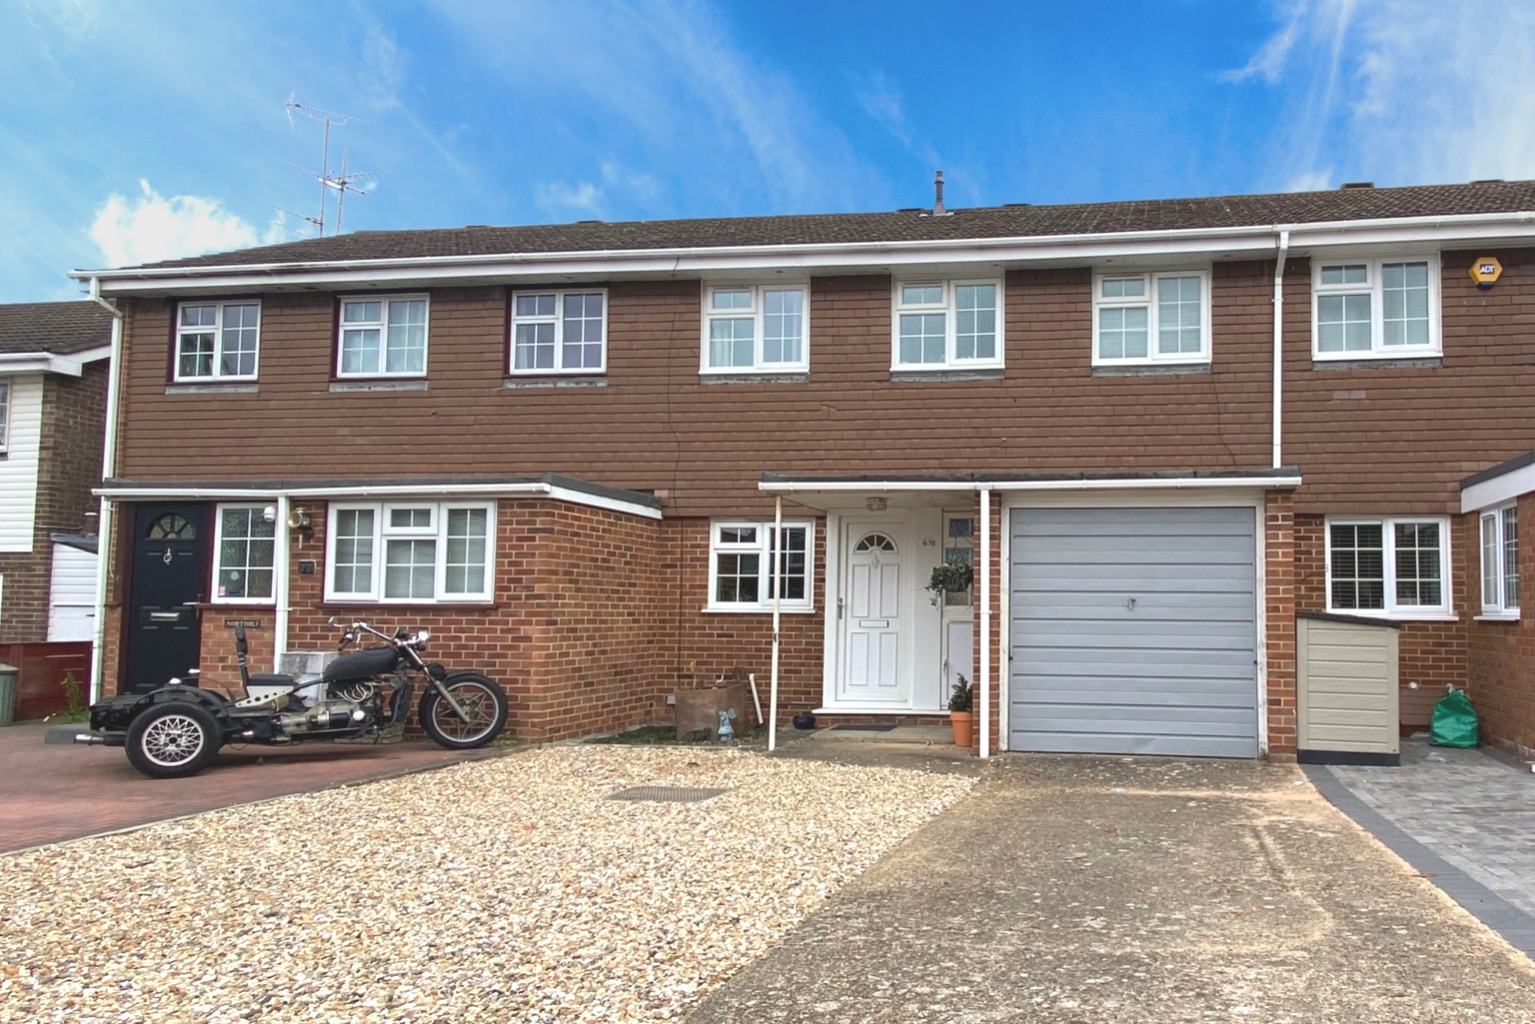 ** Check out our property video ** Marketed by Neil Fenning - A great family home in a great location, so close to train and motorway links, while being well situated for various amenities and either Wokingham or Reading towns. We can't wait to show you around!